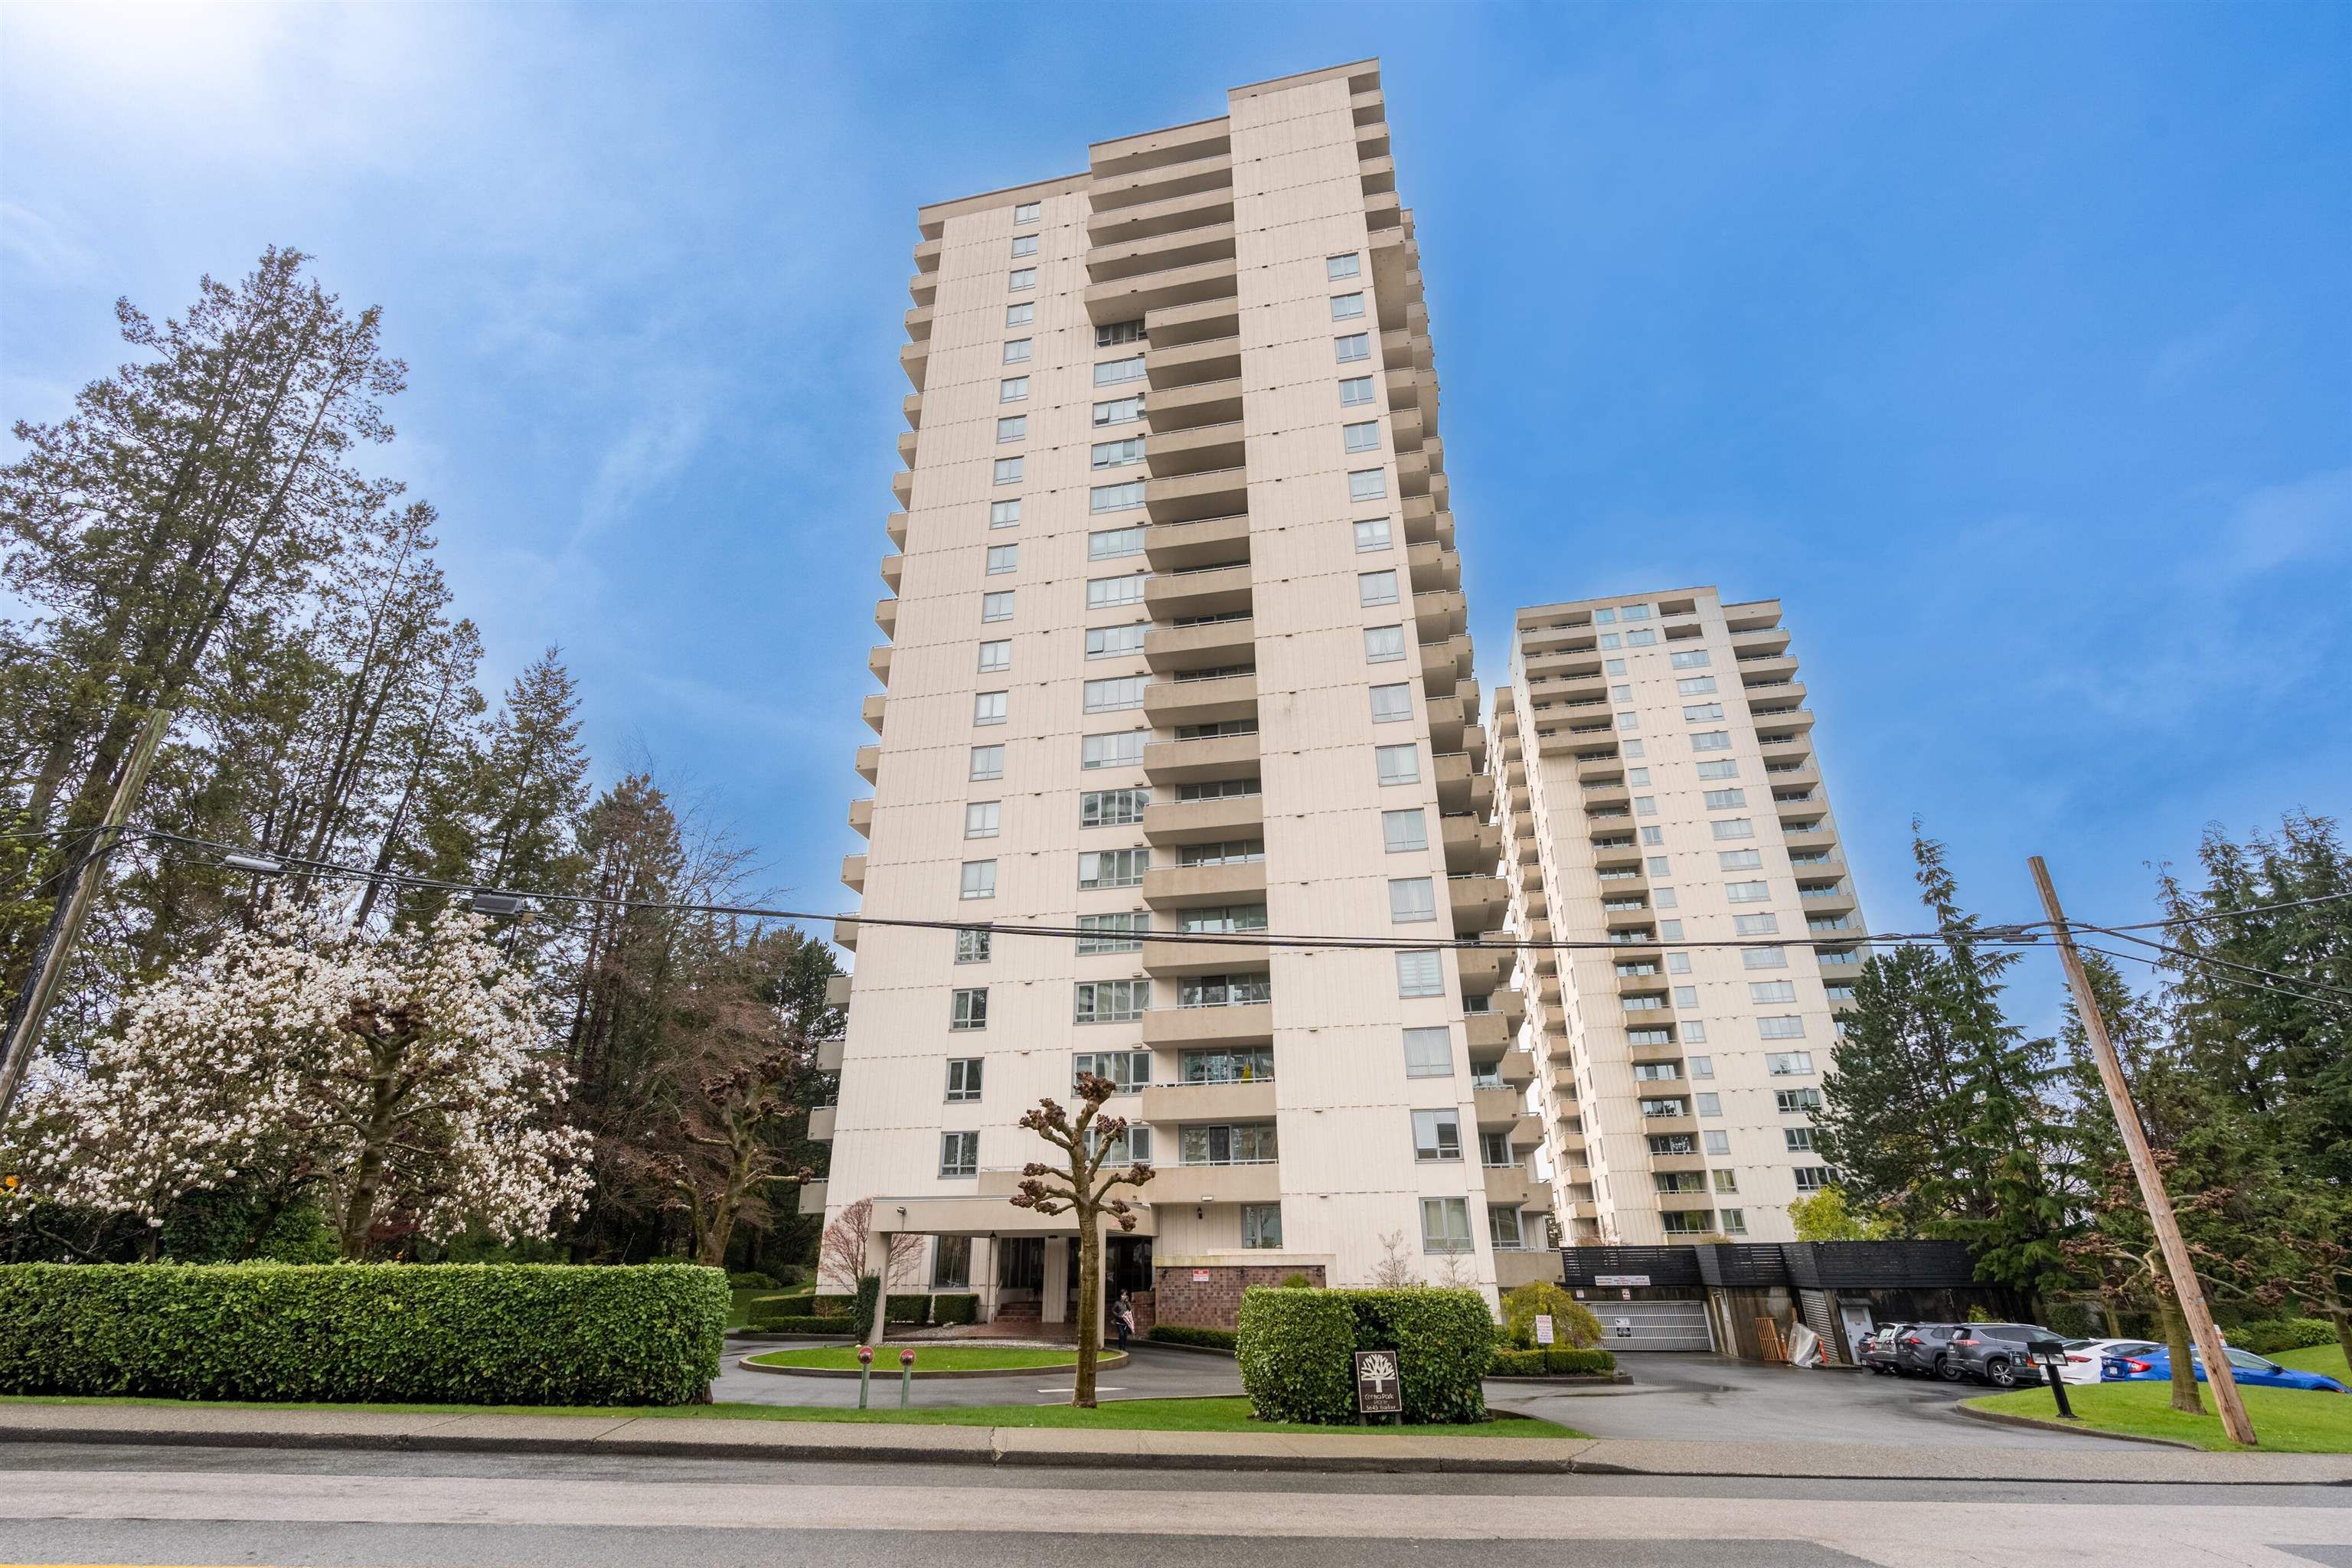  Open House on Saturday, April 30, 2022 2:00PM - 4:00PM at Central Park BS, Burnaby South